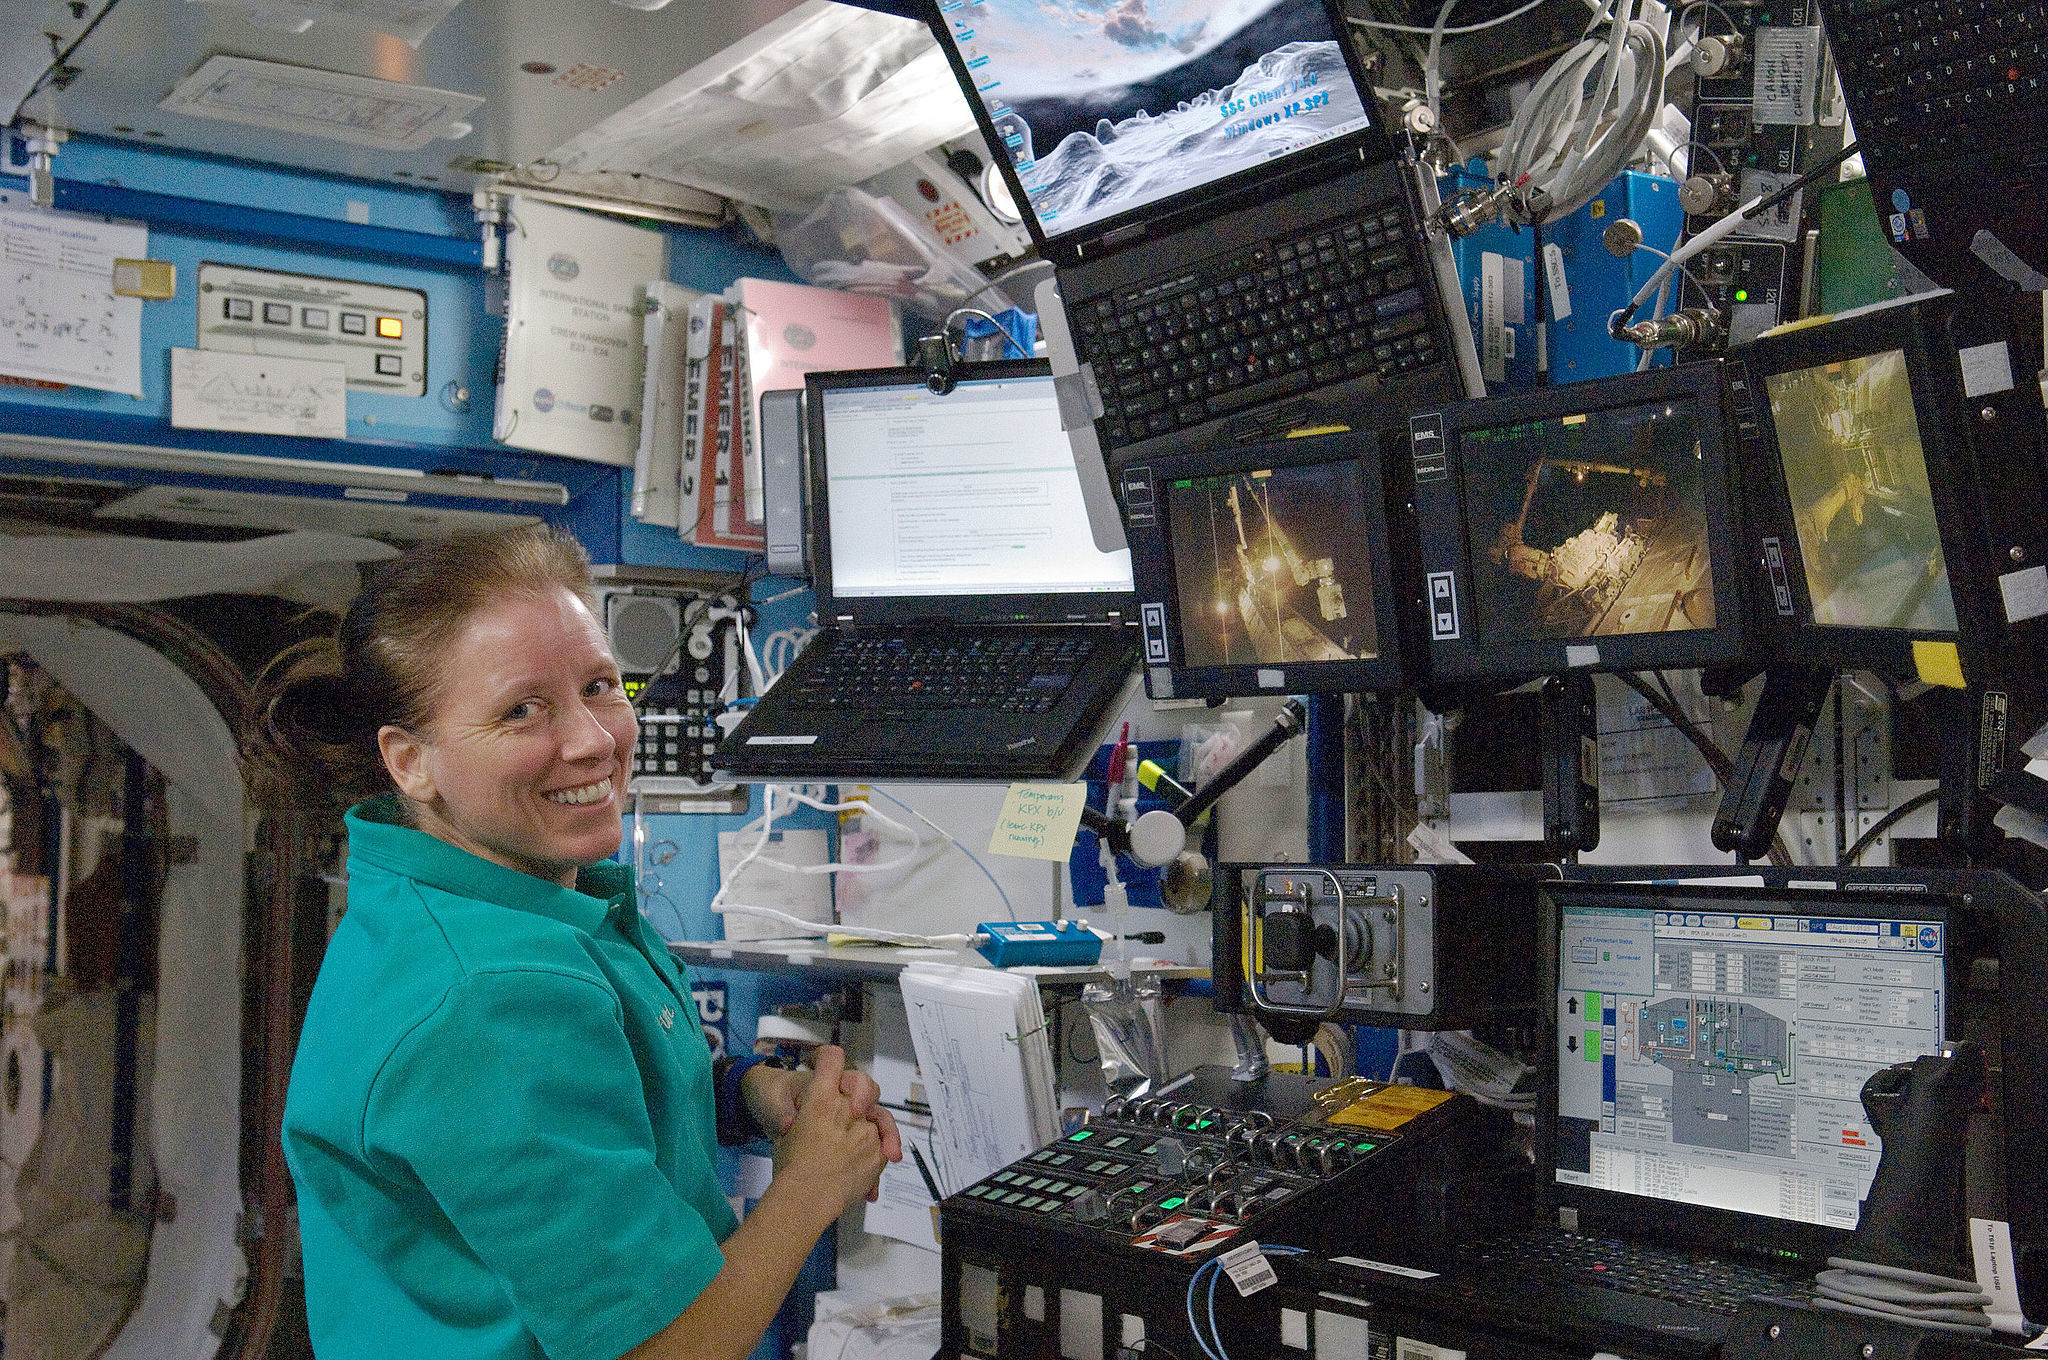 NASA astronaut Shannon Walker, Expedition 24 flight engineer, is pictured near a robotic workstation in the Destiny laboratory of the International Space Station. One day I'll have a workstation as cool as hers. LICENCE: Public Domain.